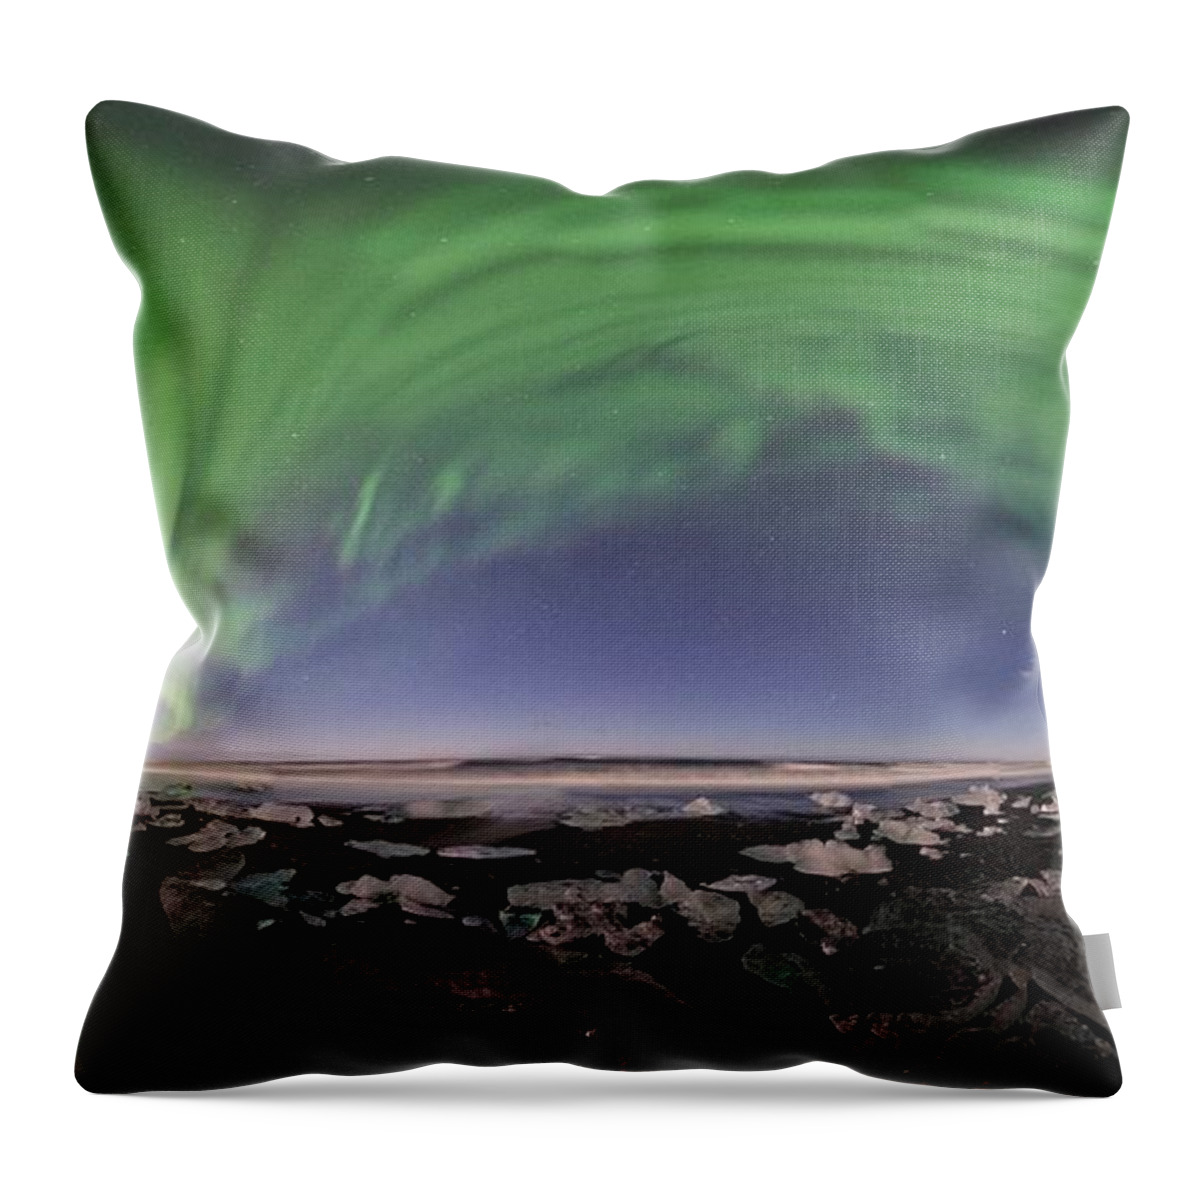 All Rights Reserved Throw Pillow featuring the photograph Iceland Aurora Beach Panorama by Mike Berenson